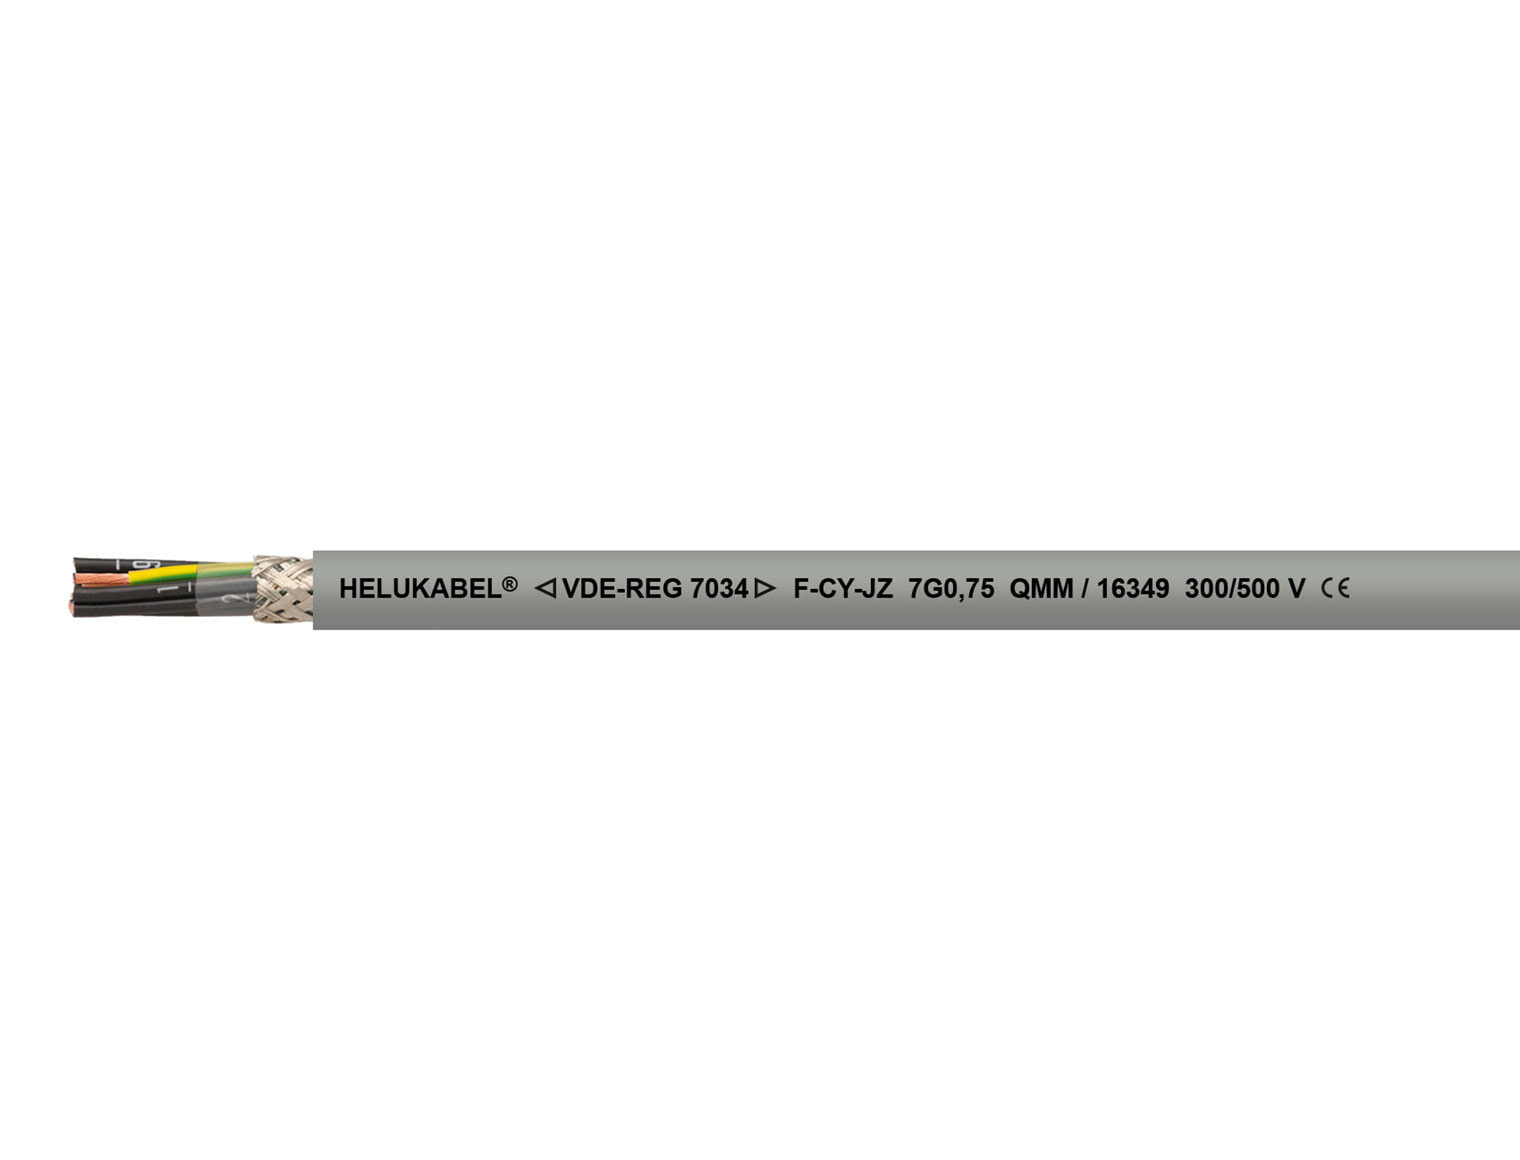 Helukabel HELU F-CY-OZ 2x0.5 16320 - Low voltage cable - Grey - Polyvinyl chloride (PVC) - Polyvinyl chloride (PVC) - Cooper - -10 - 80 °C